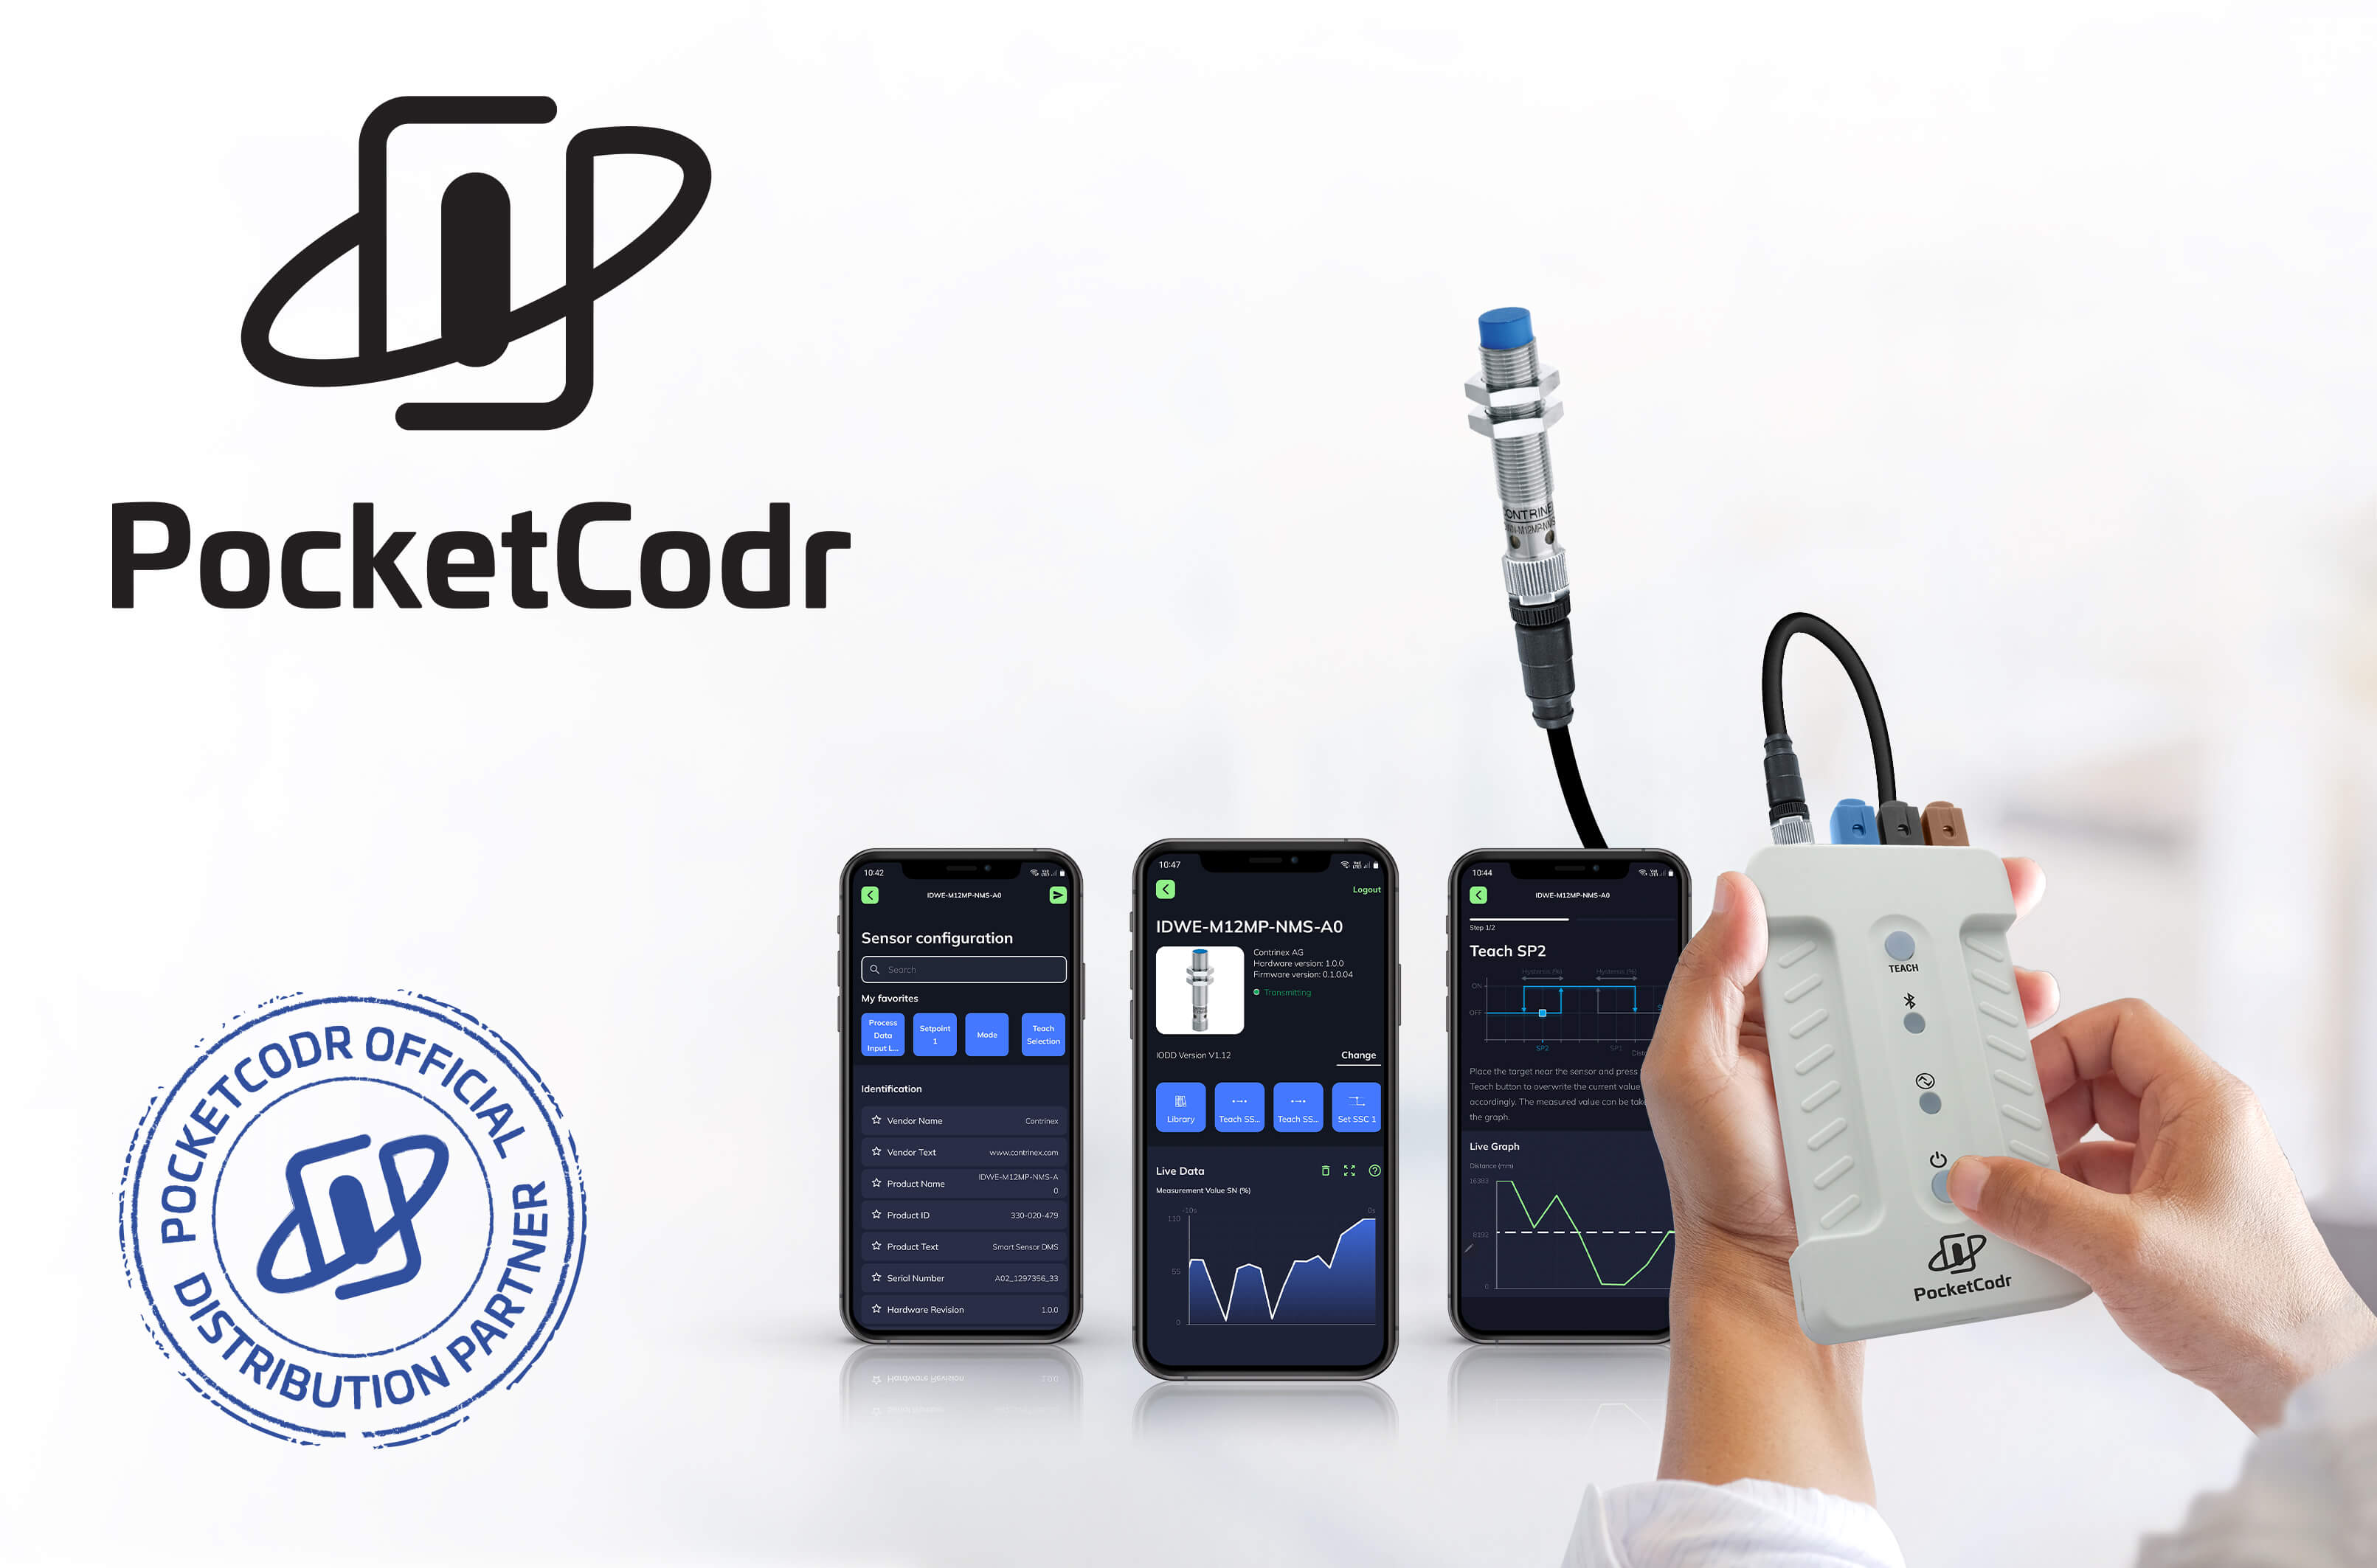 Innovative PocketCodr Configurator in the Palm of Your Hand!